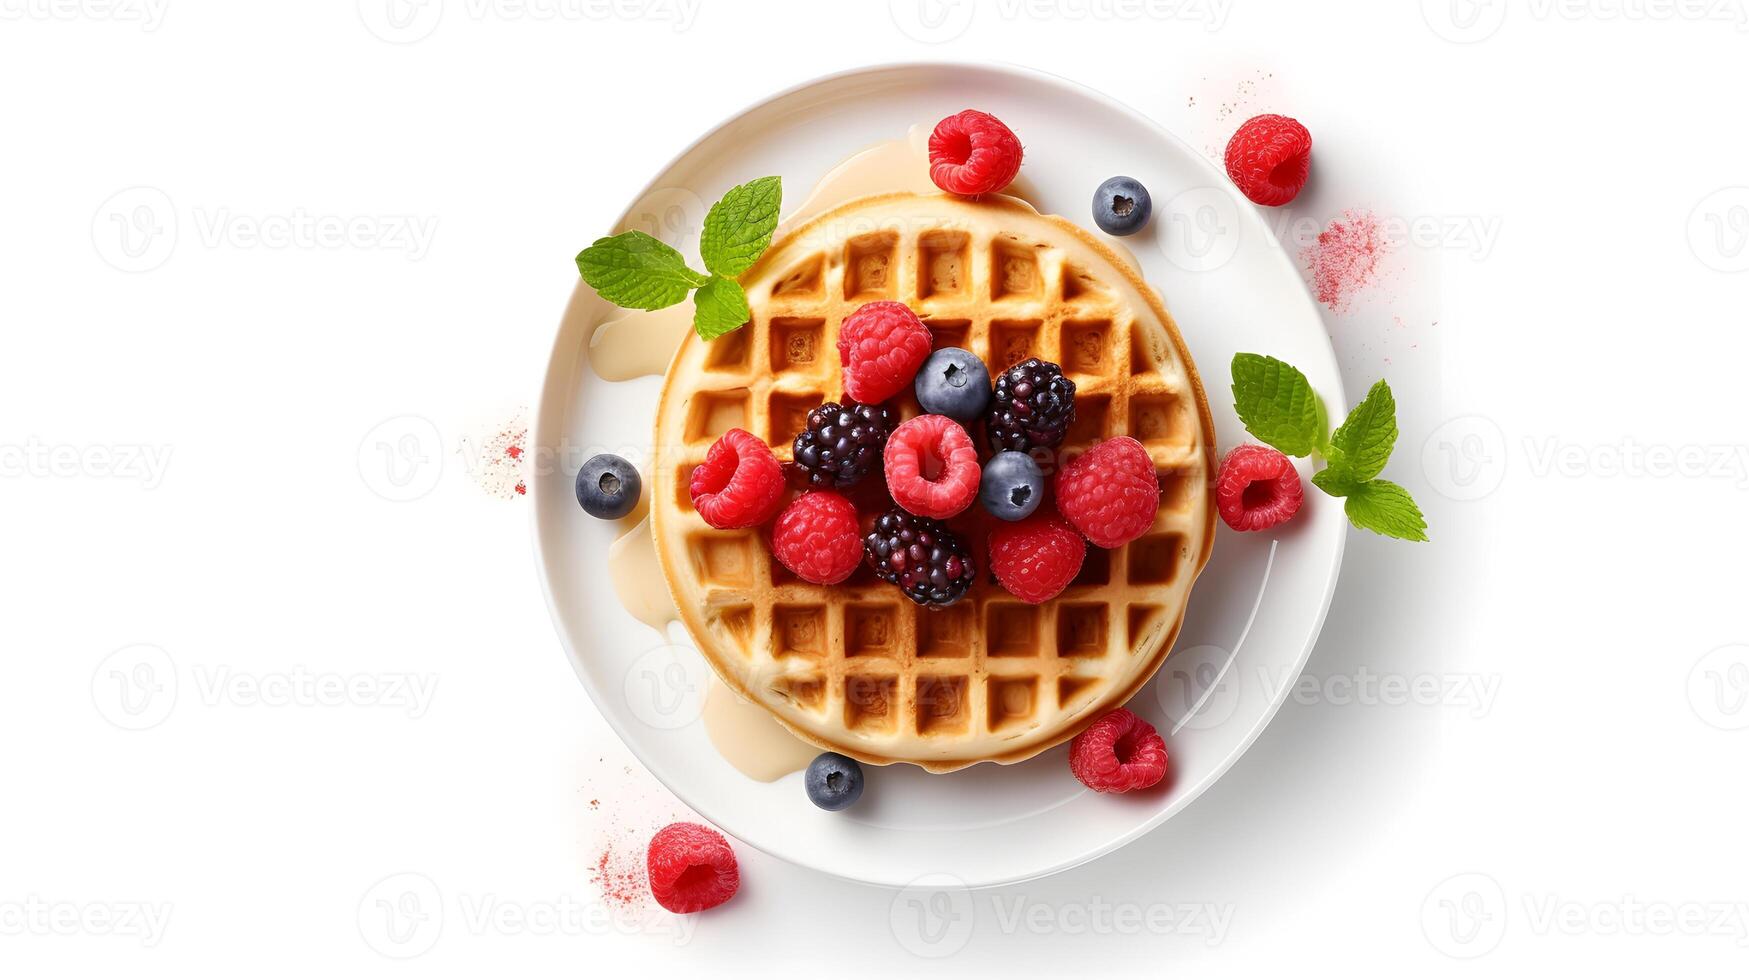 Belgium square waffles with fresh berries isolated on white background, top view photo